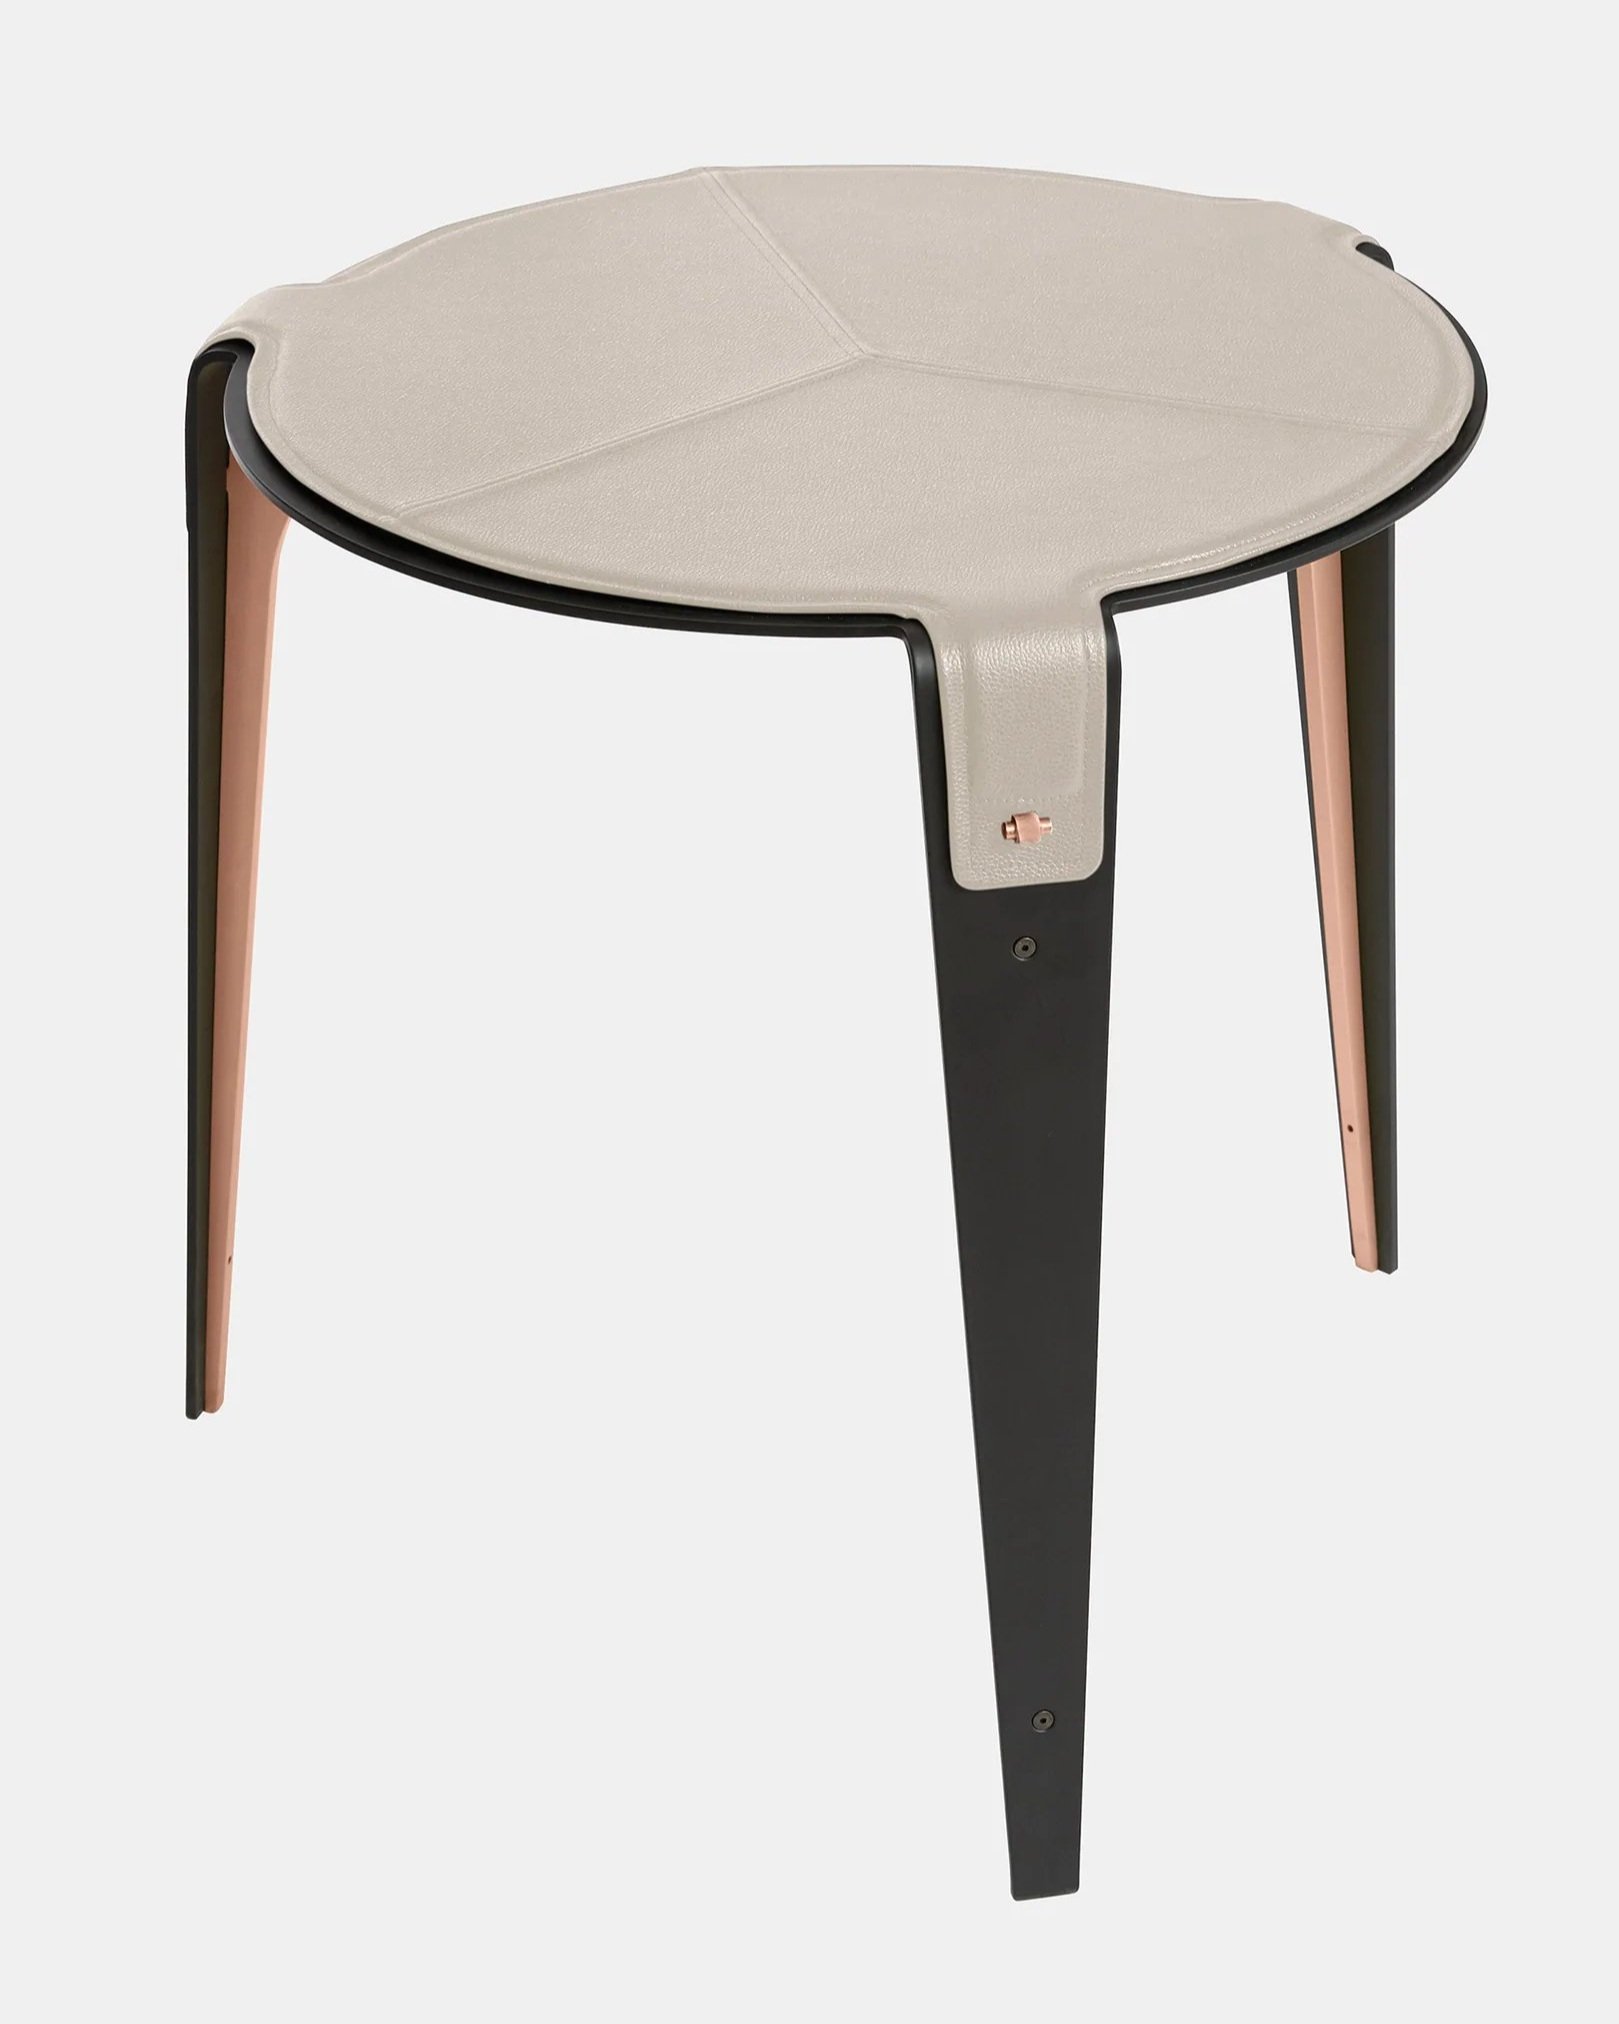 BARDOT SIDE TABLE - SATIN COPPER + NUDE PINK